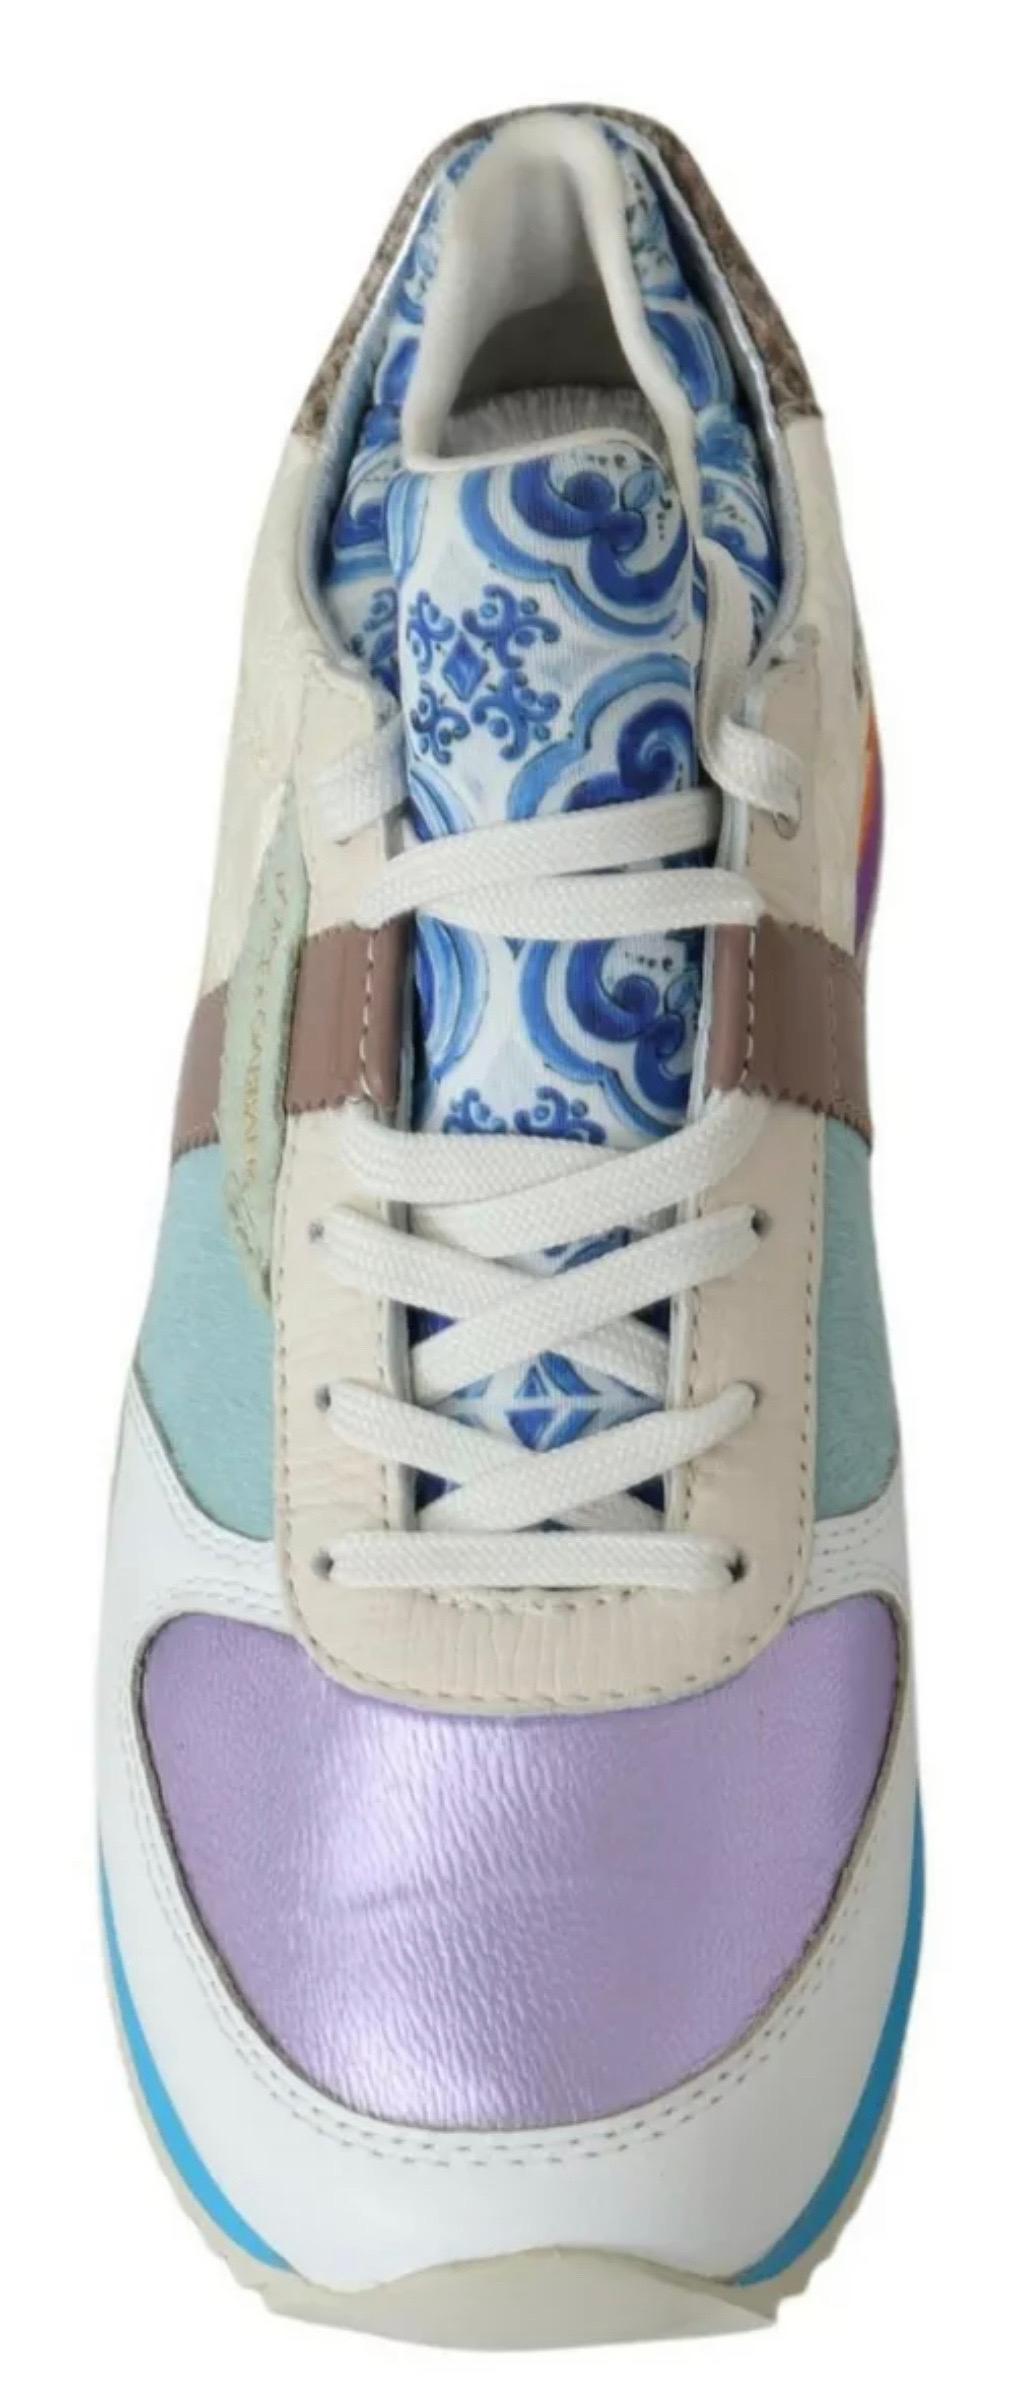 DOLCE & GABBANA

Gorgeous, brand new with tags 100% Authentic Dolce & Gabbana Ladies Sneakers NIGERIA made of polyester with patchwork design.



Modell: Nigeria Sneakers
Color: Multicolor
Material: Polyester, Leather, Cotton, Silk, Elastane
Sole: